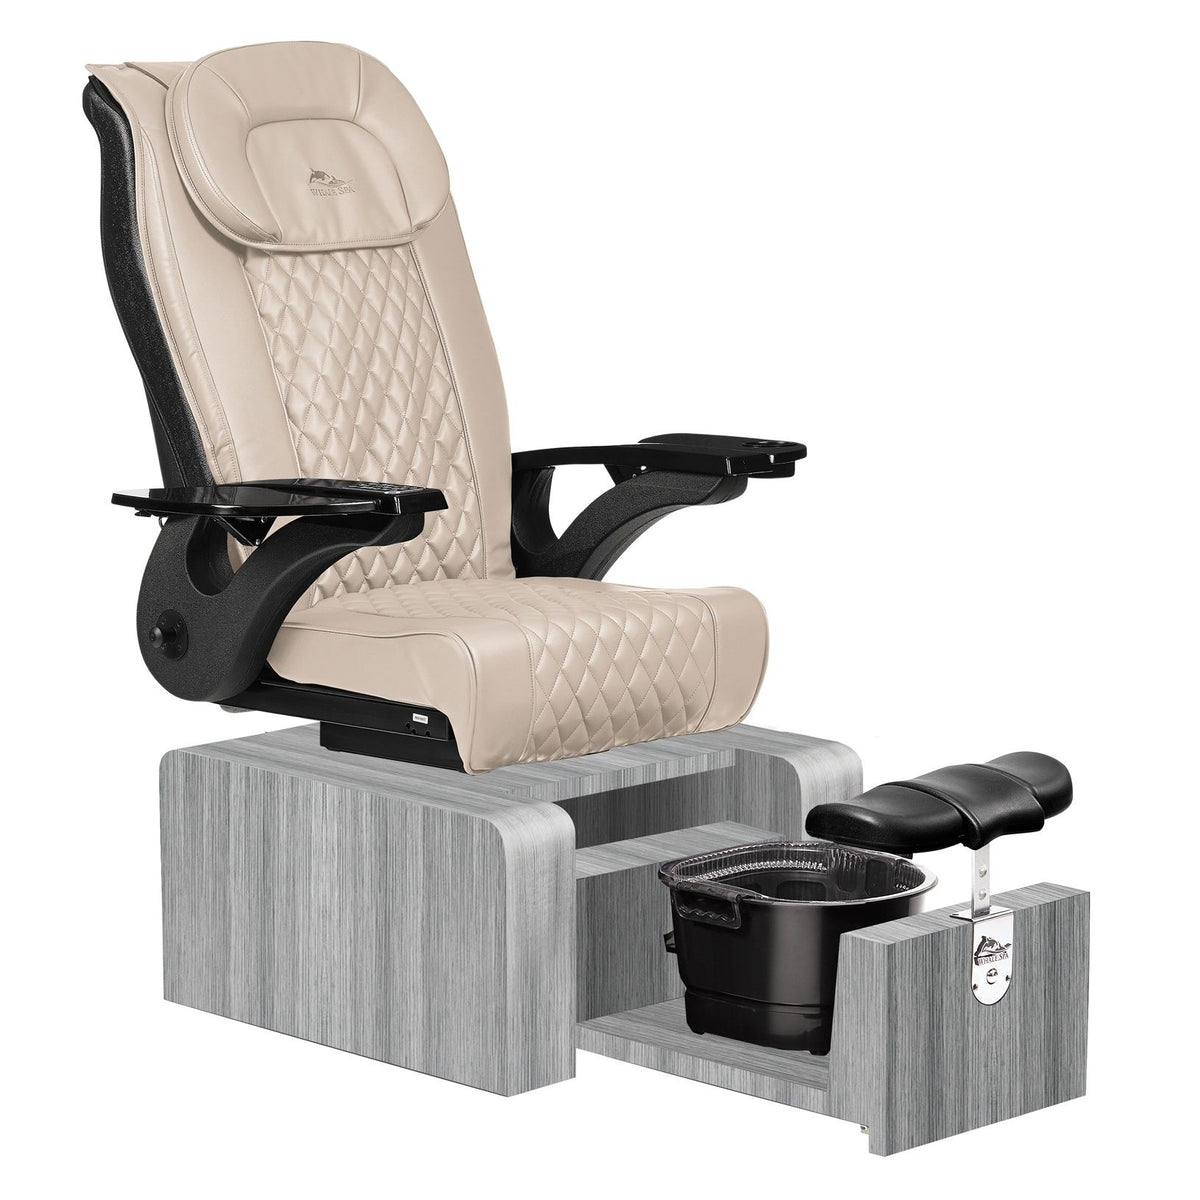 Whale Spa Whale Spa Pure - Portable No Plumbing Portable Spa &amp; Pedicure Chair with Free Trolley &amp; Tech Stool Pedicure Chair - ChairsThatGive